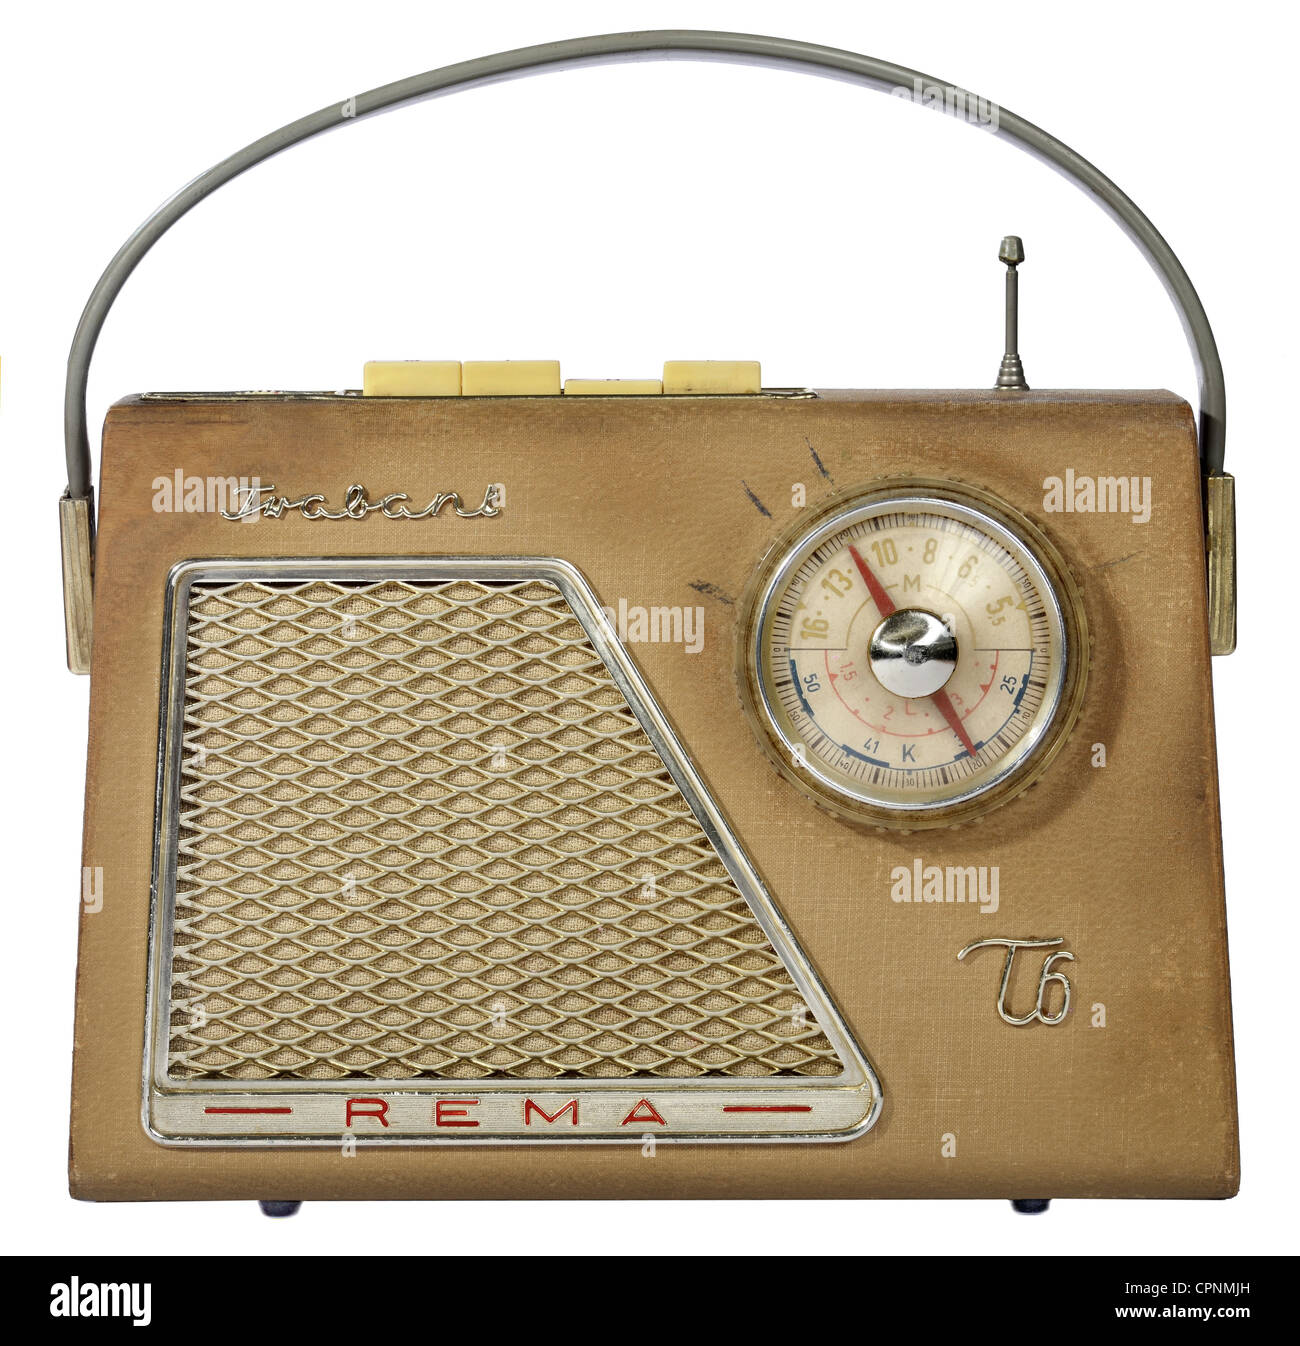 broadcast, radio, portable radio Rema "Trabant T6", device is weighing  1.8kg, made by: Rema, Stollberg, Saxony, East-Germany, 1961,  Additional-Rights-Clearences-Not Available Stock Photo - Alamy